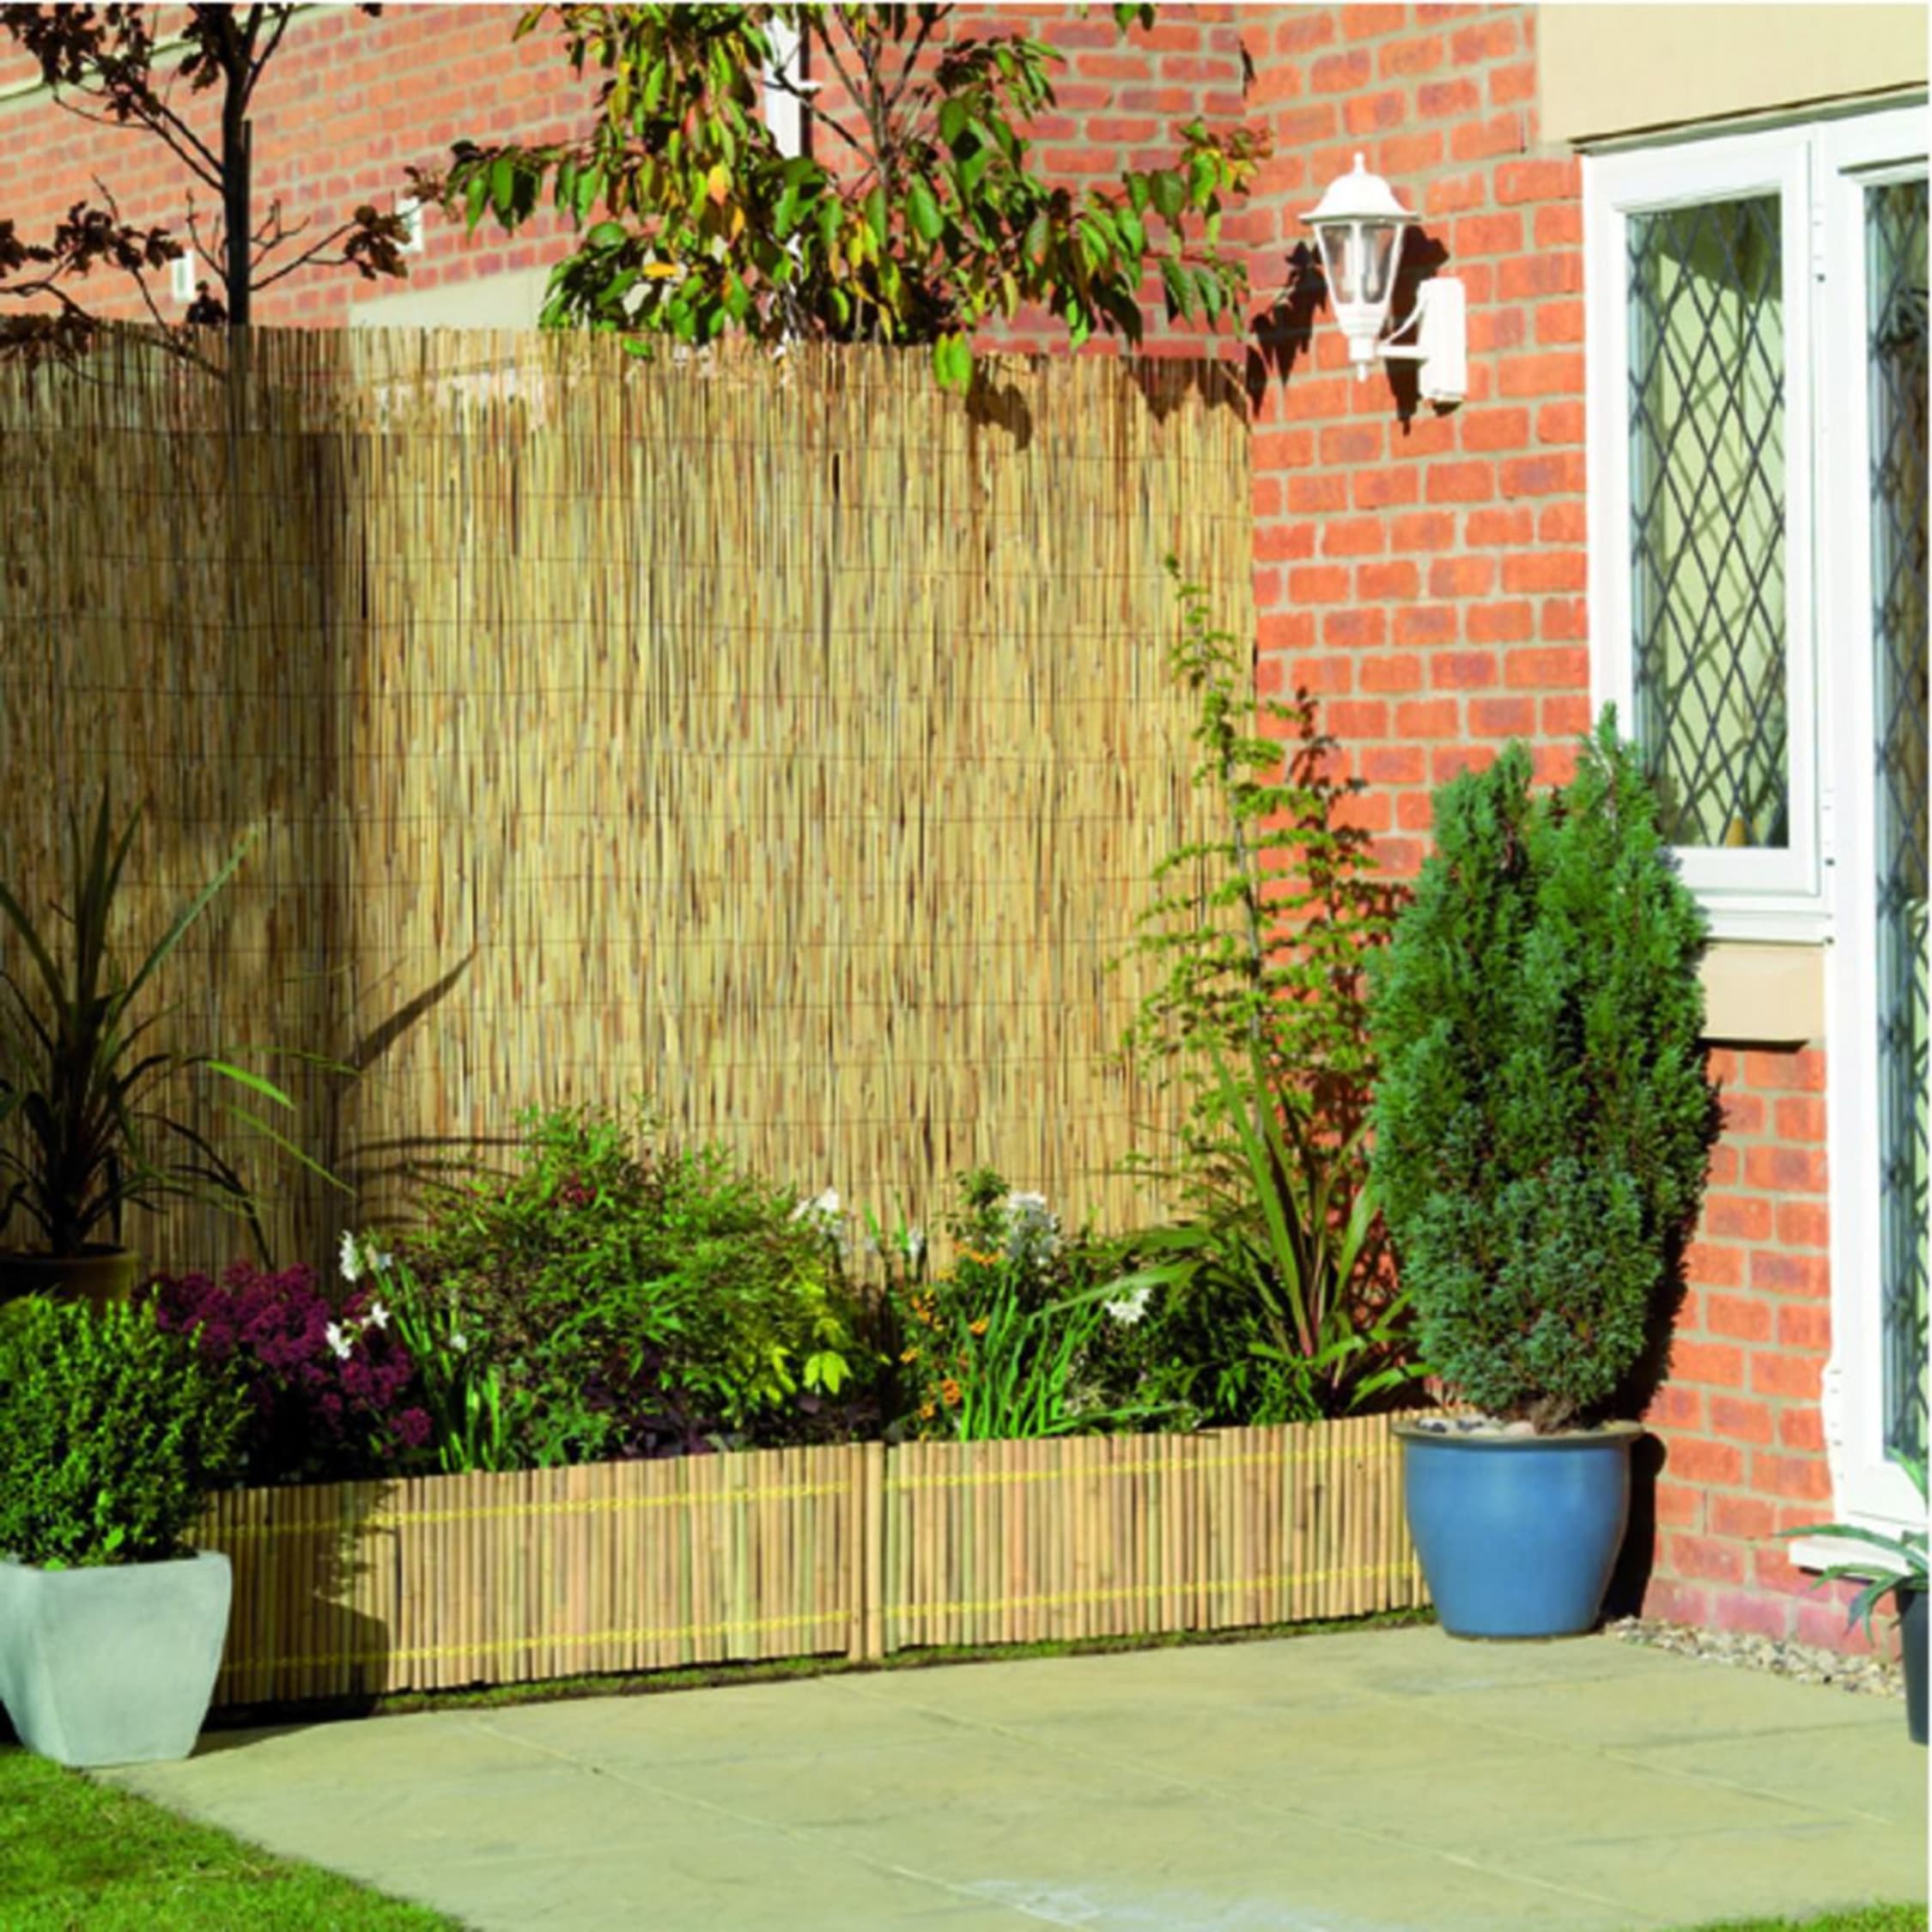 2M x 4M Garden Reed Fencing Durable Ideal For Screening Walls & Fences 